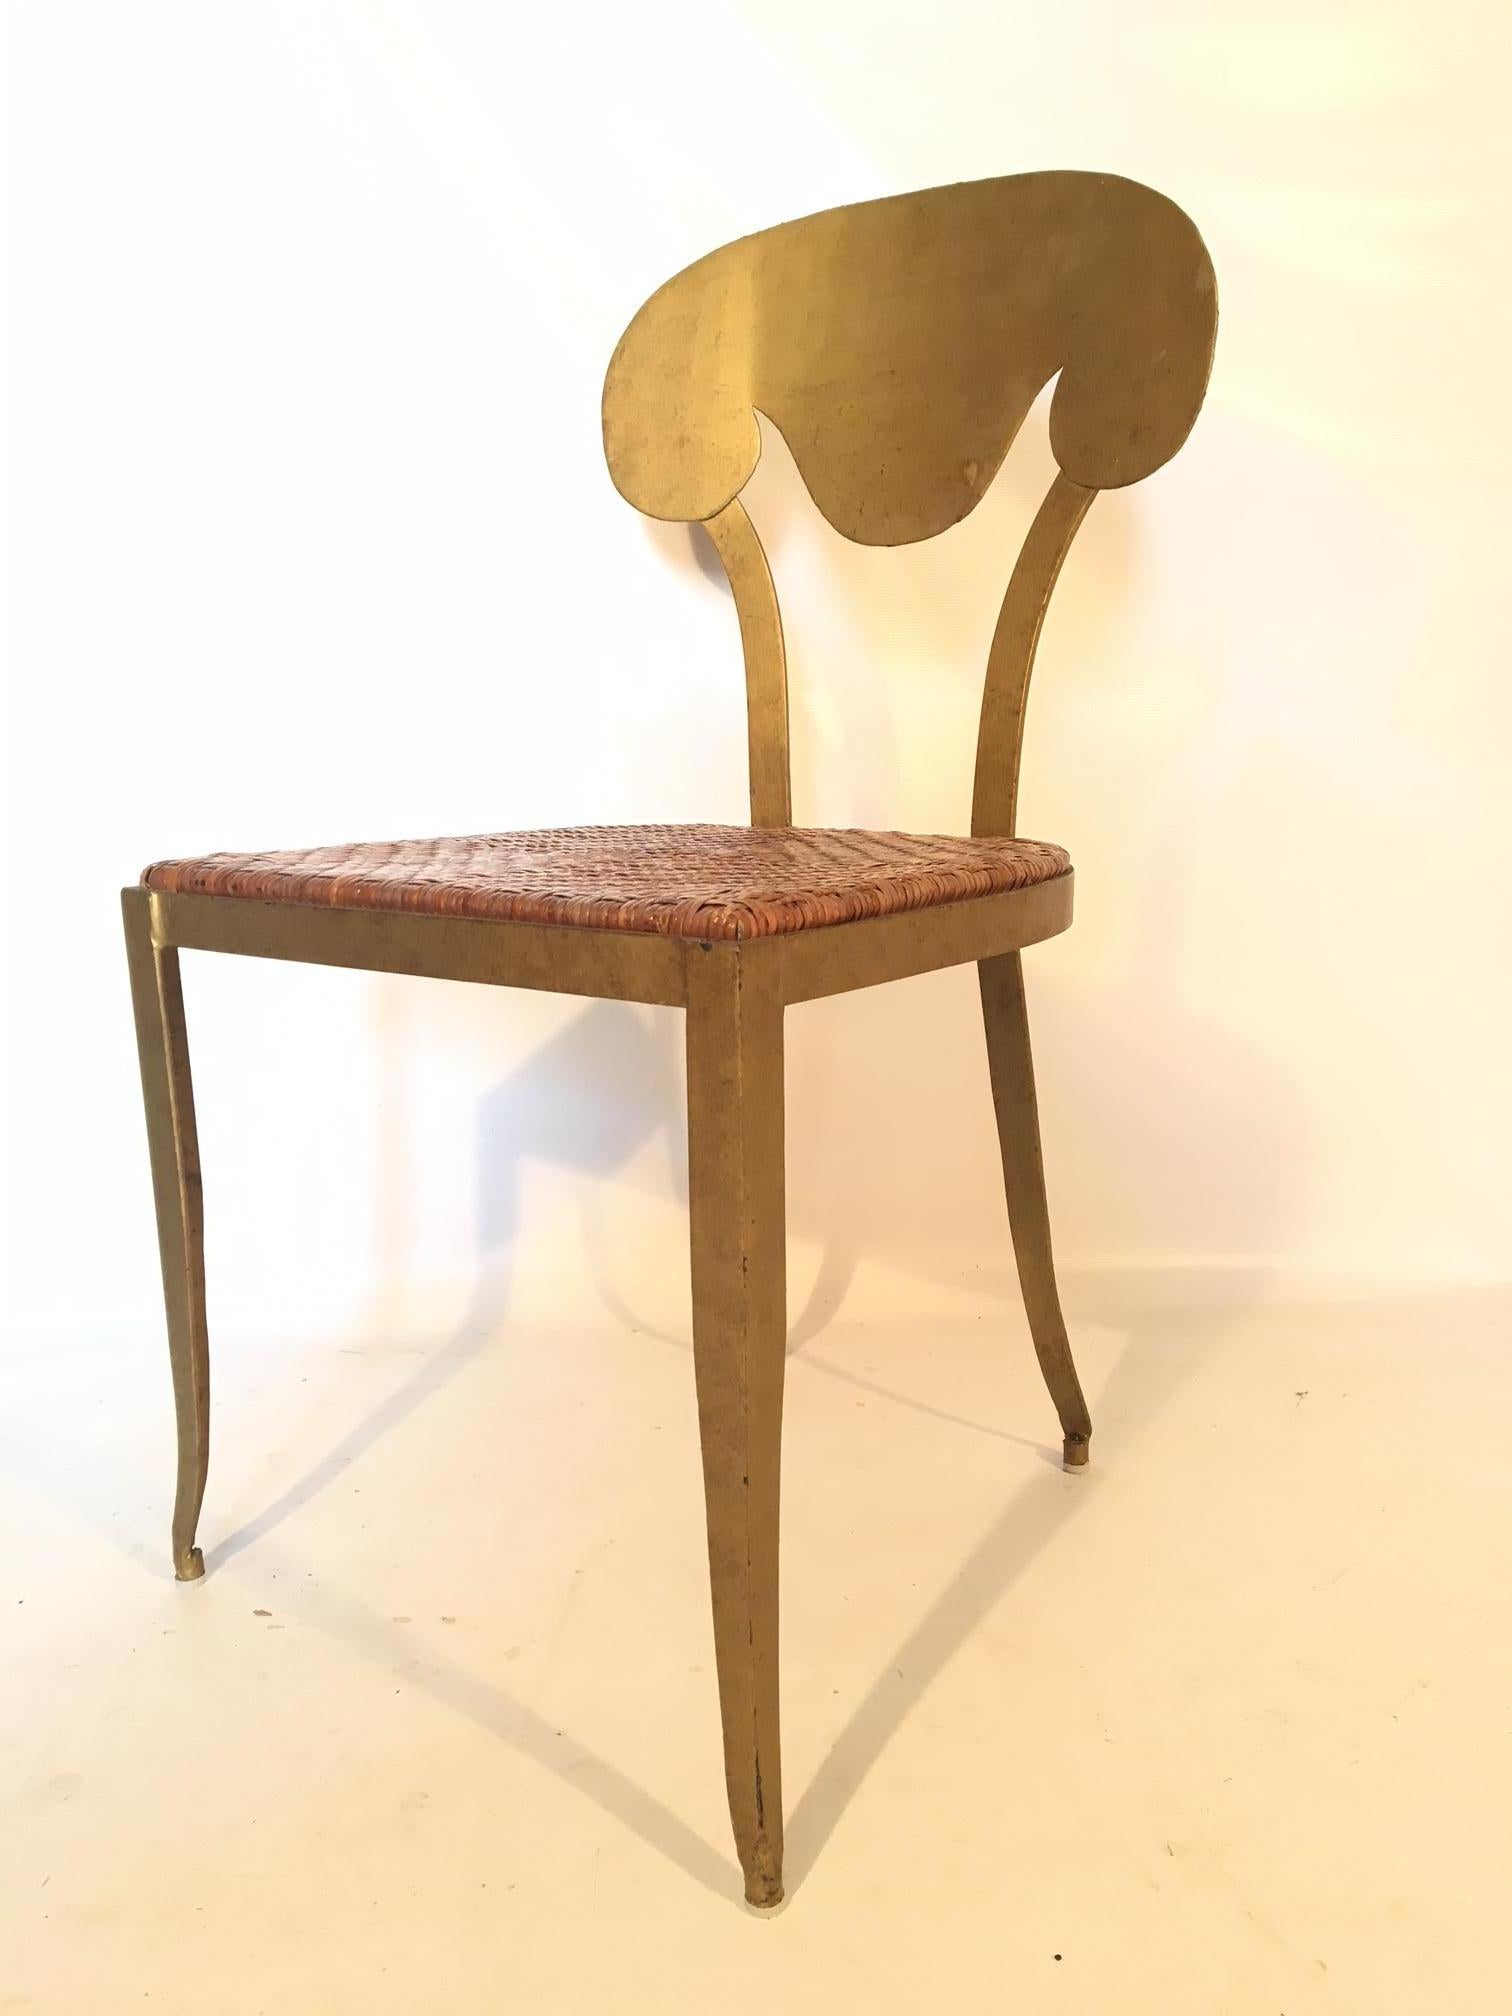 Metal vanity stool circa 1950s features rattan seat and gold gilt finish. Excellent vintage condition with only minor signs of age appropriate use.